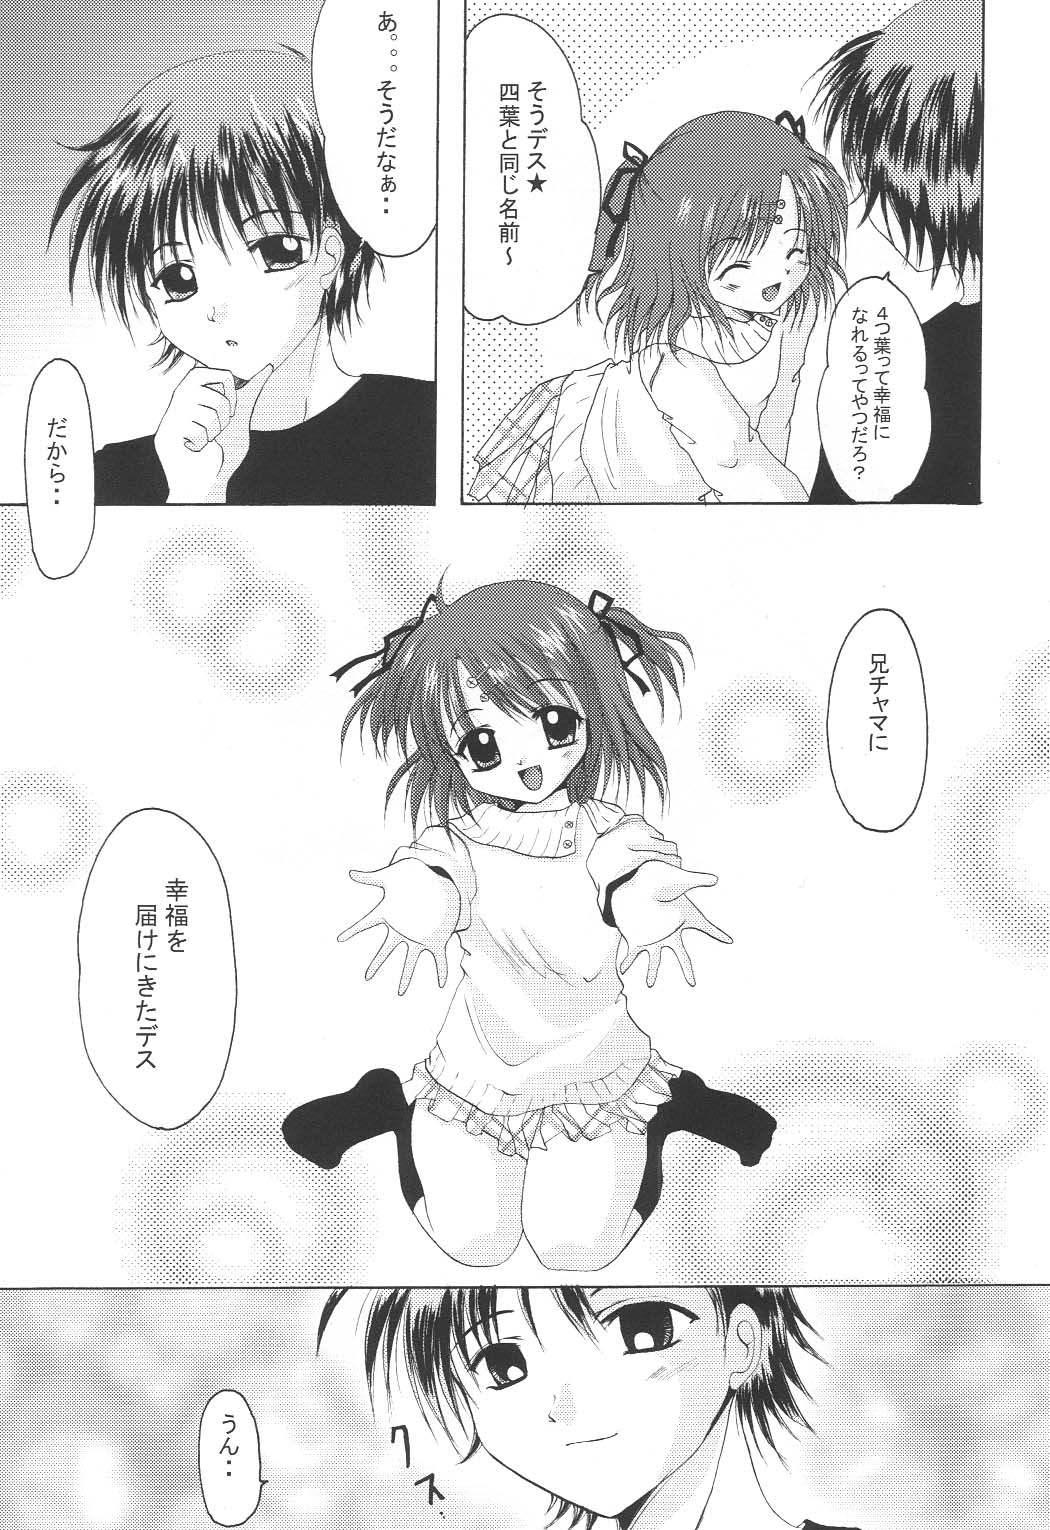 Transsexual Shiawase no Clover - Sister princess Amateur - Page 9